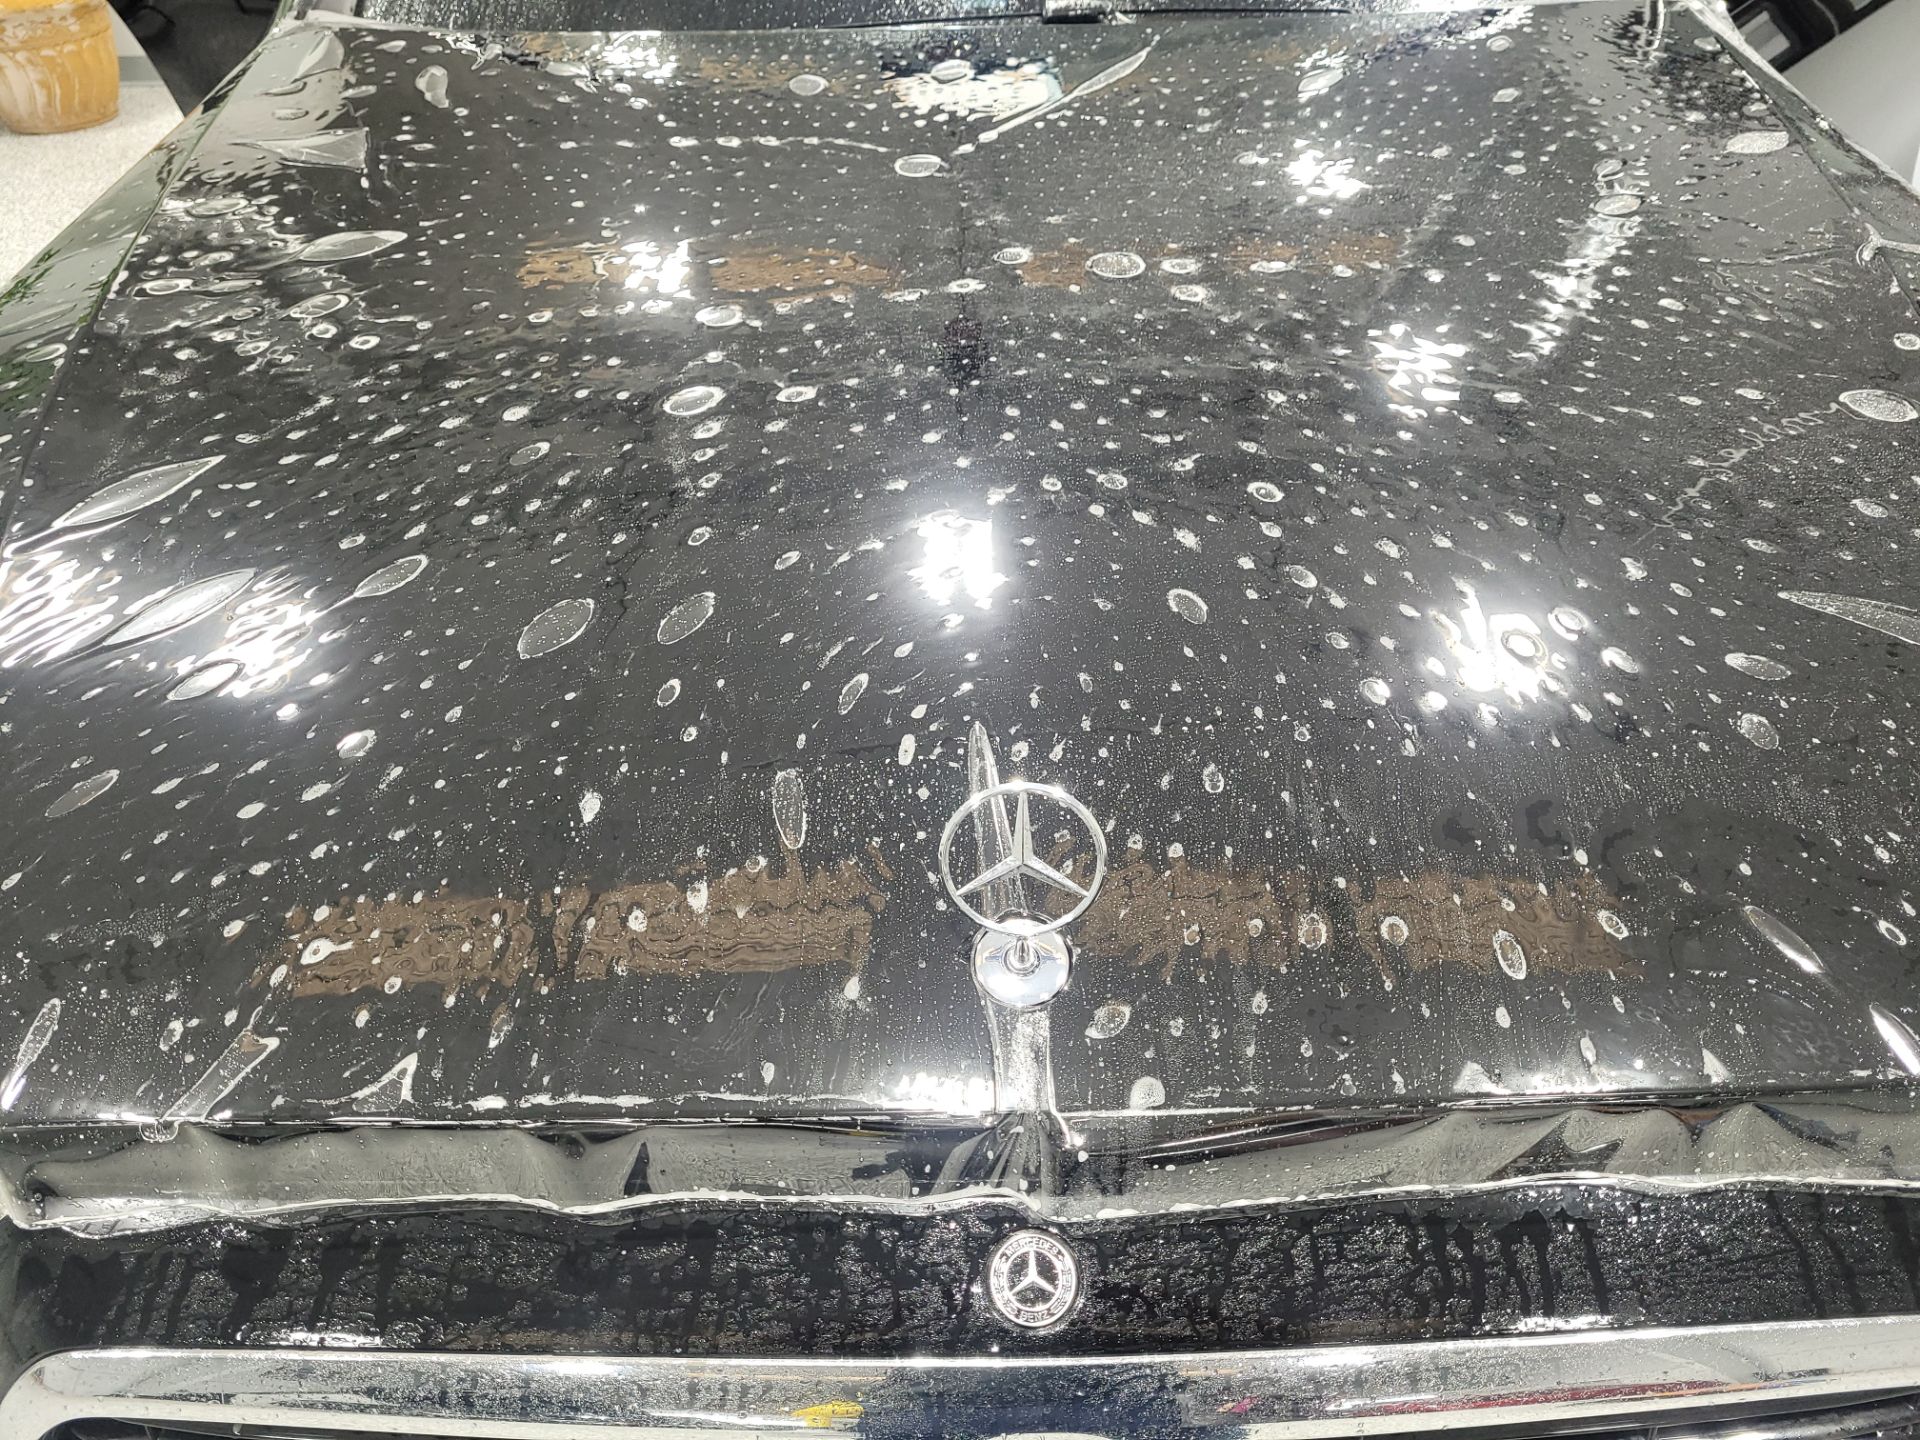 Clear Bra Paint Protection for Ultimate Vehicle Care